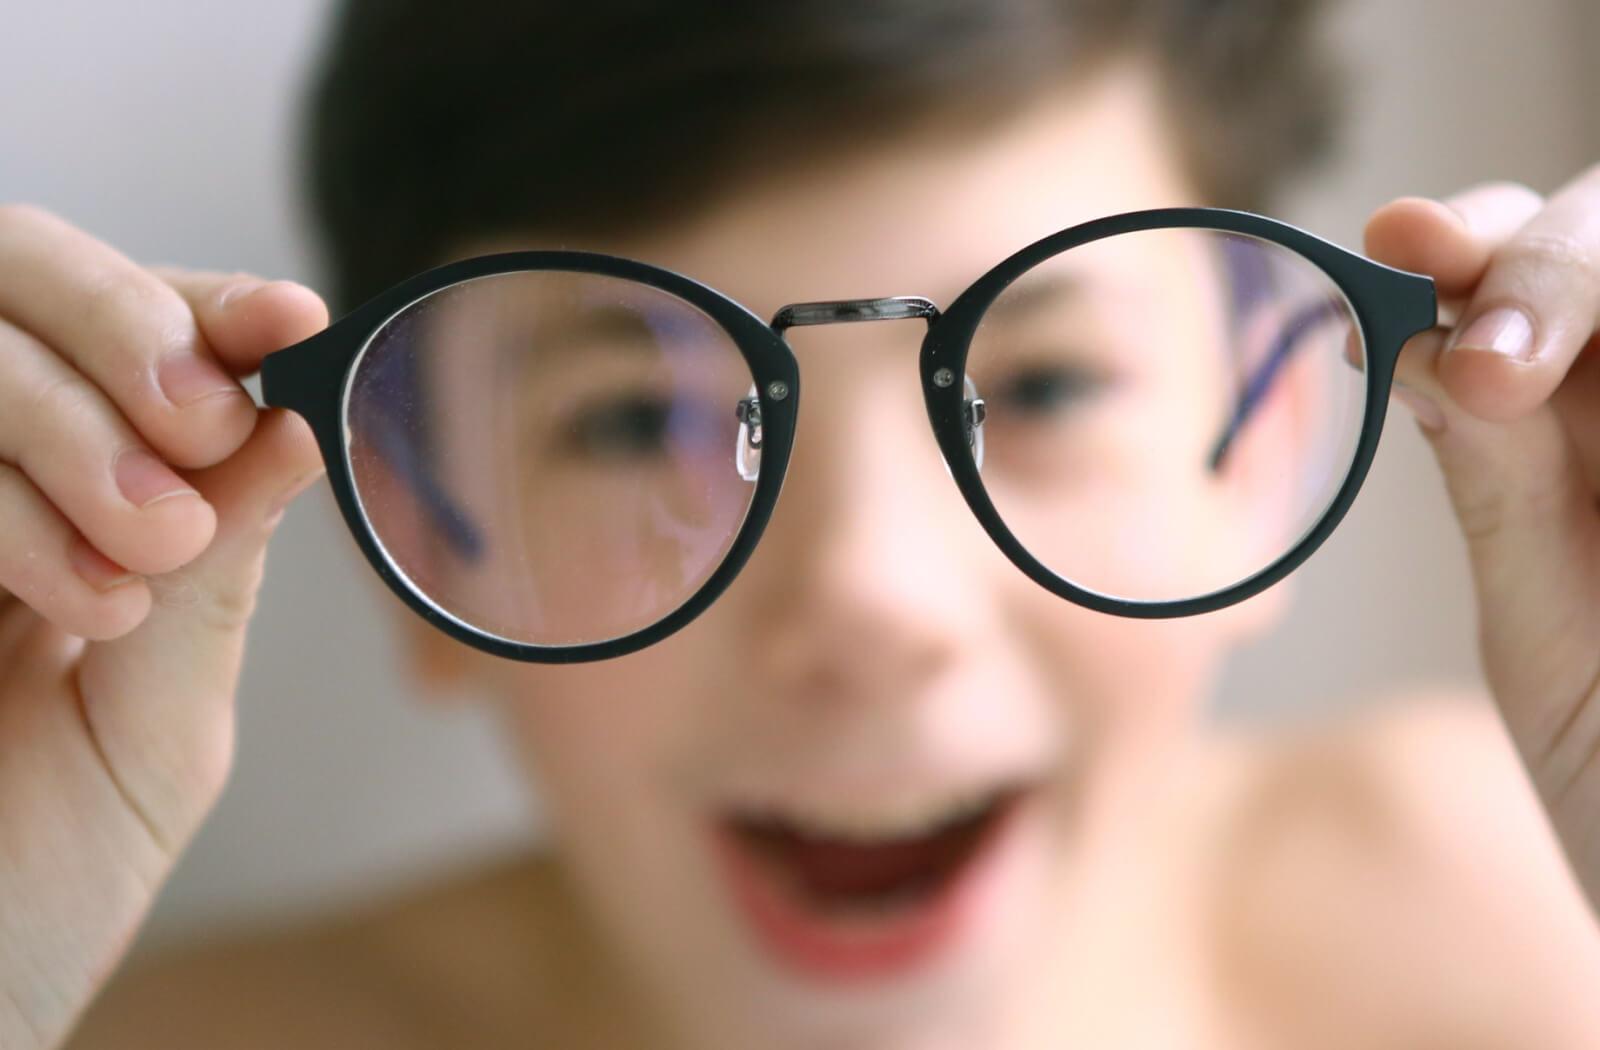 a child with myopia holds his glasses close to the camera. the image is blurry, except for through the lenses of the glasses